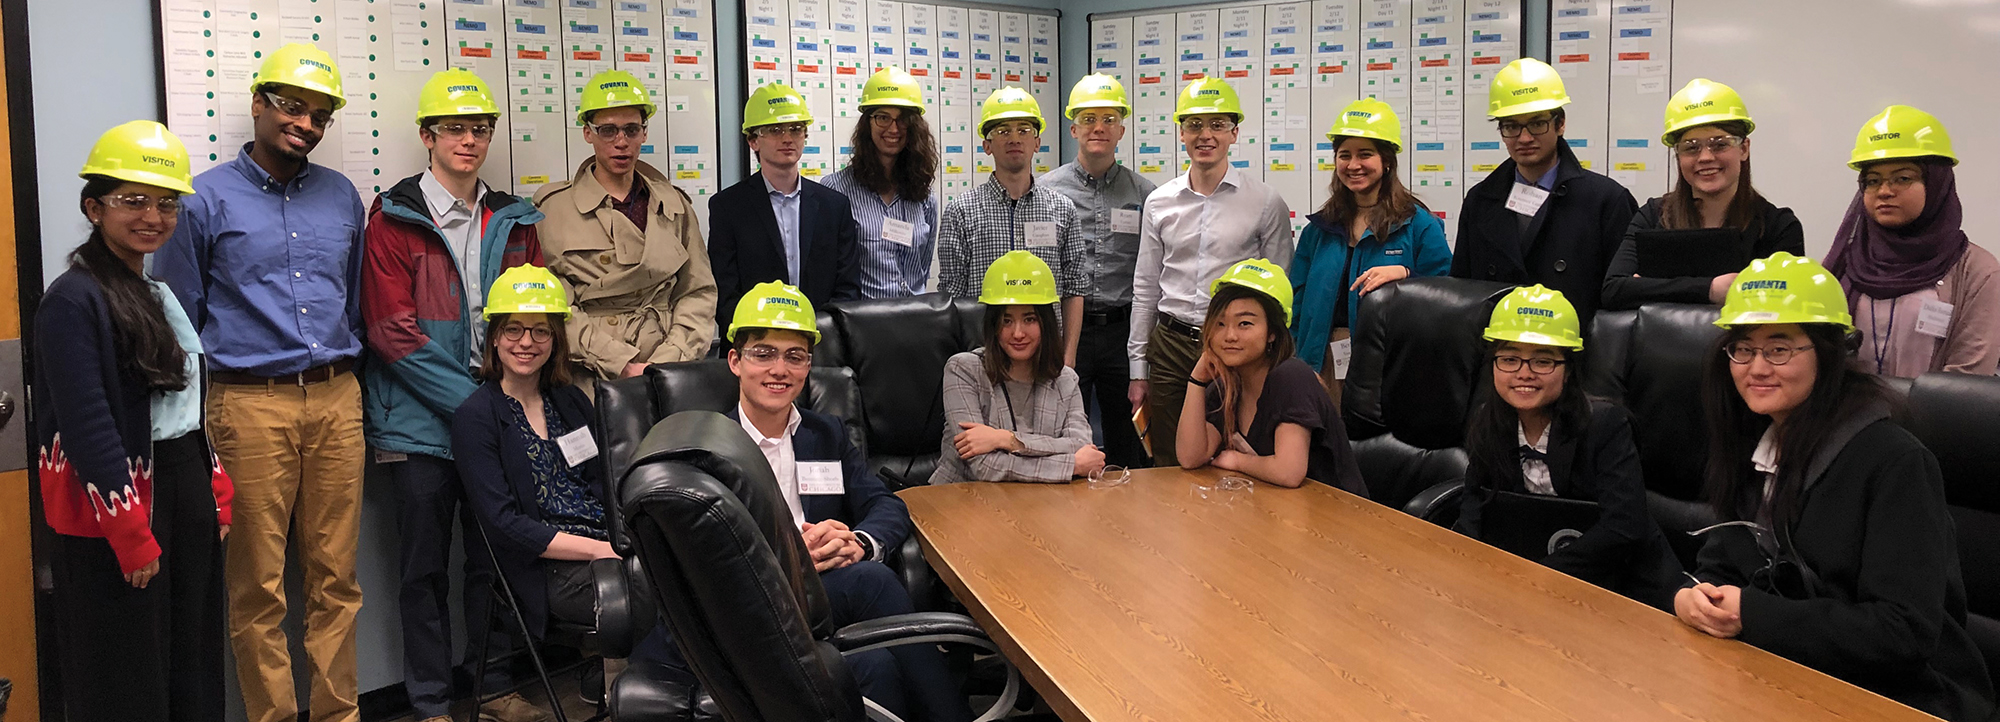 Students visit Covanta, a company that produces energy from municipal trash, during a 2019 career trek to Boston.